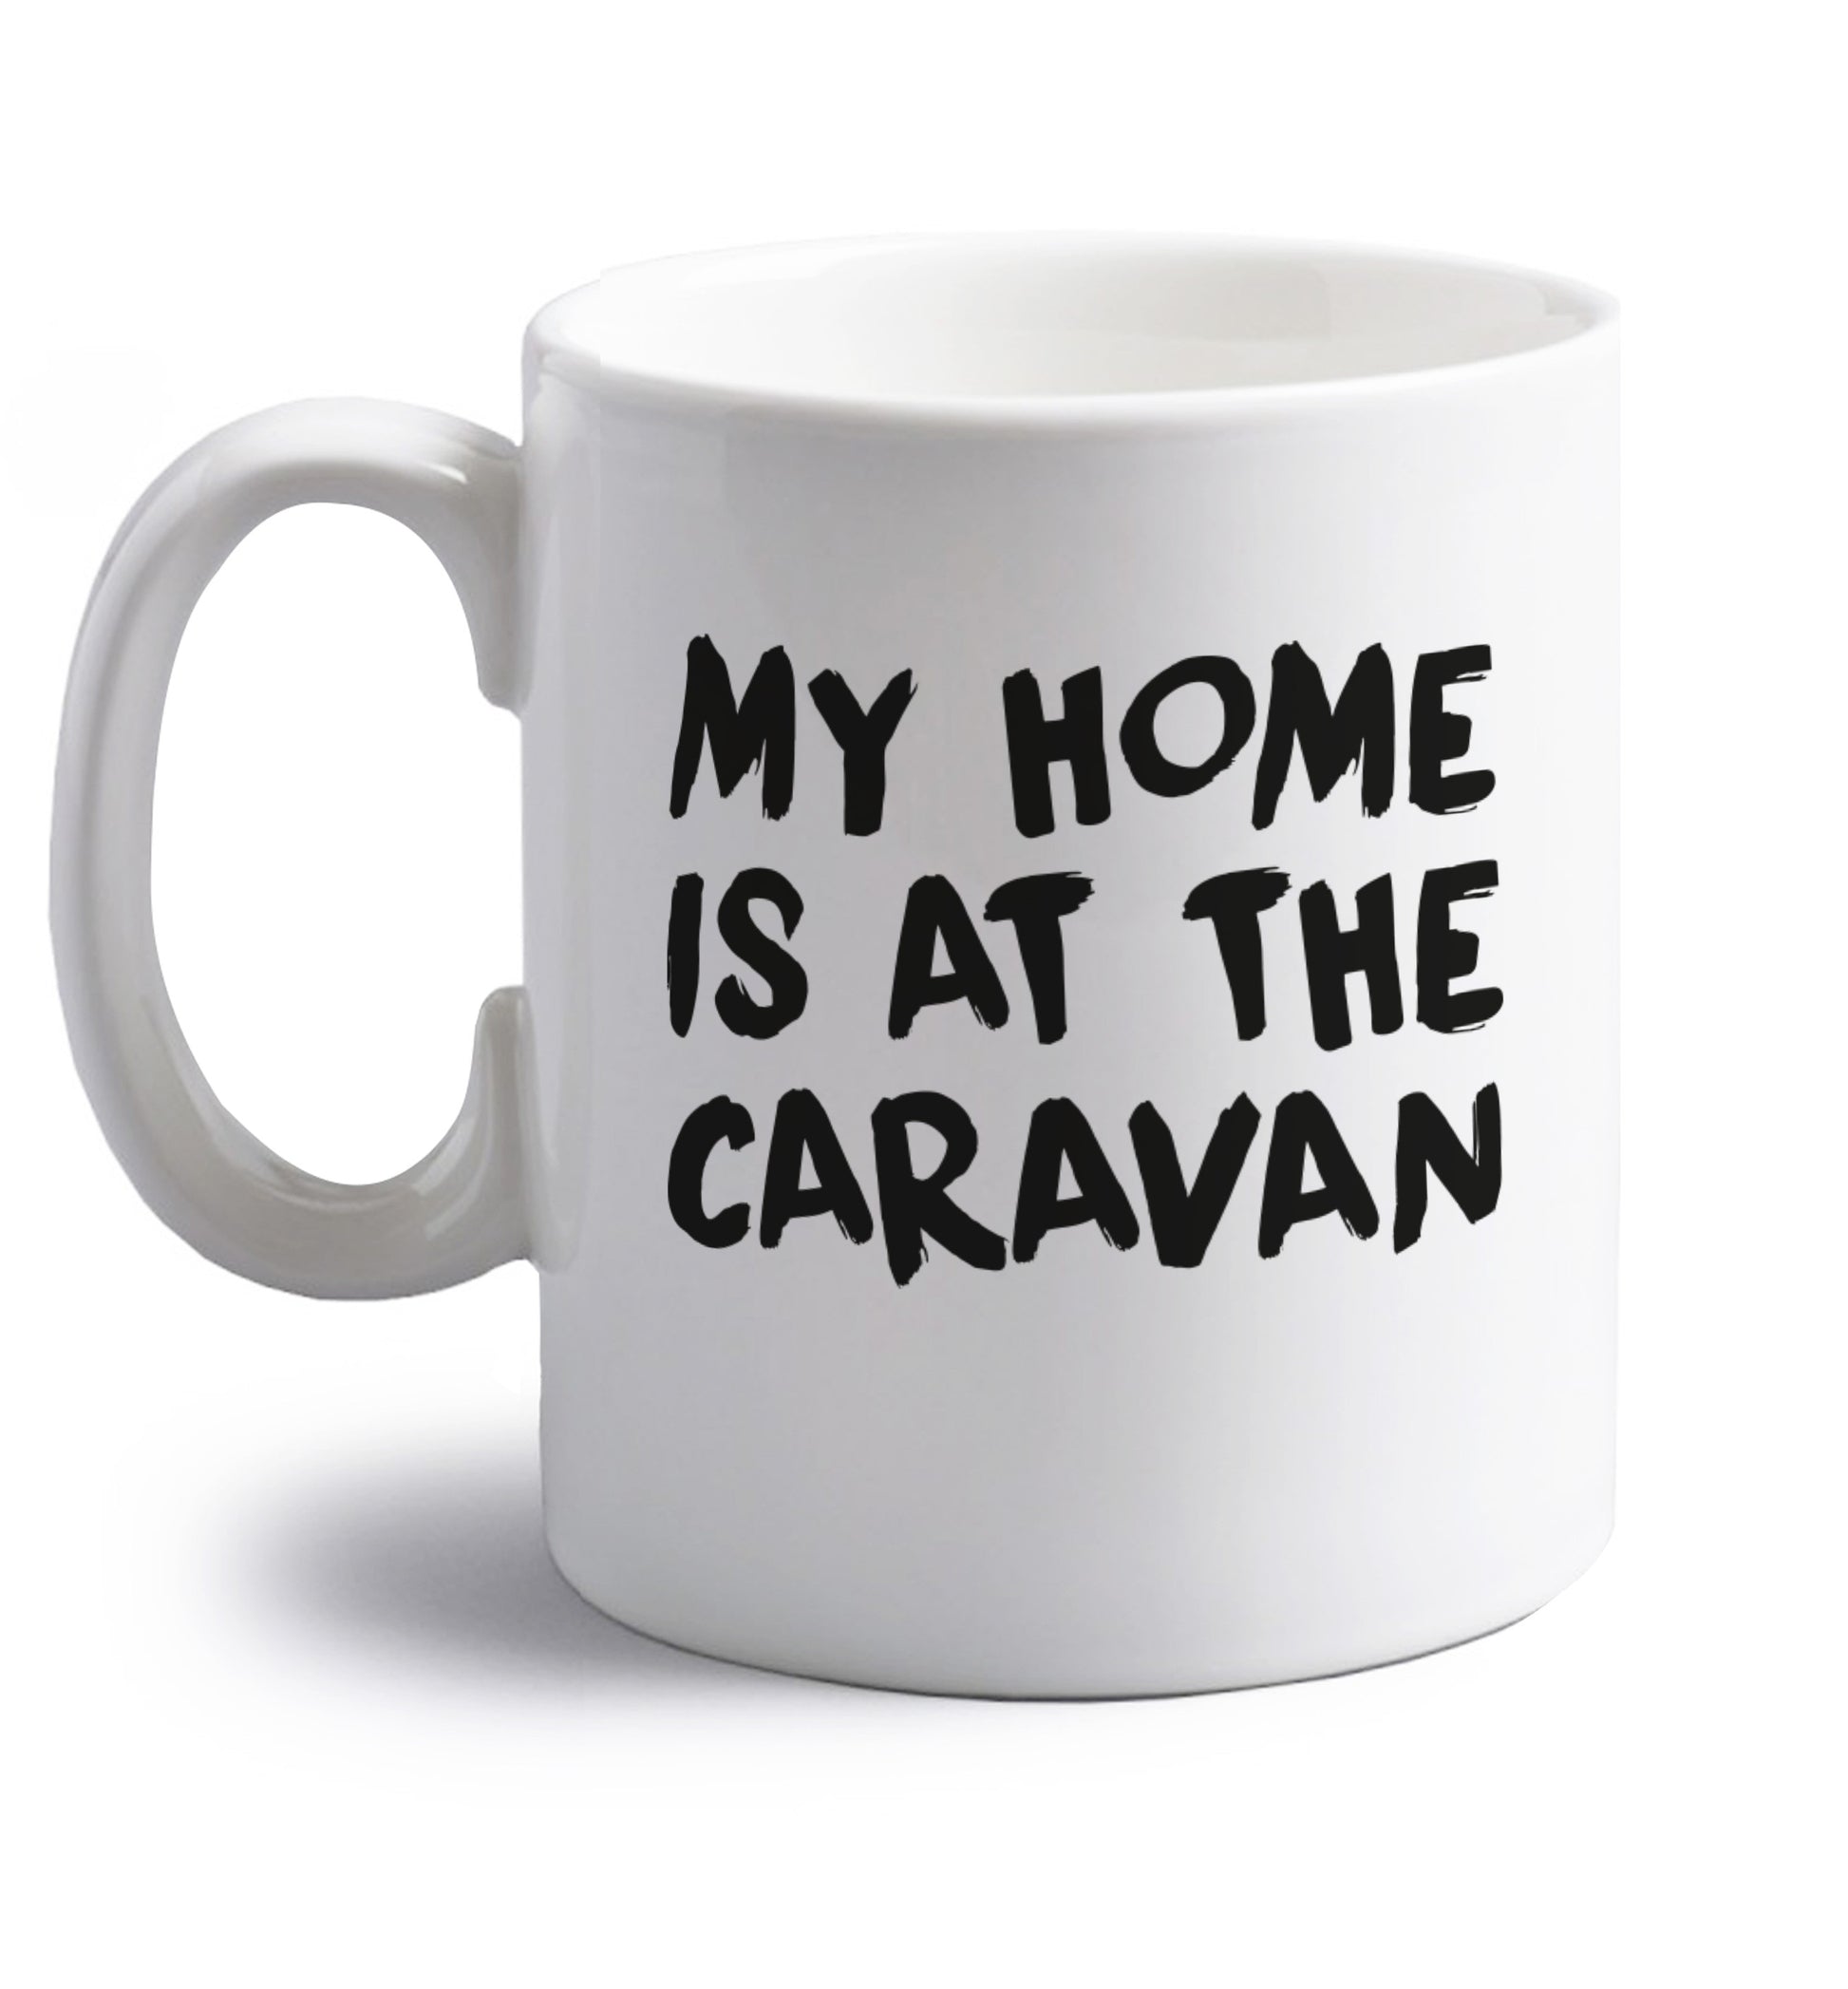 My home is at the caravan right handed white ceramic mug 